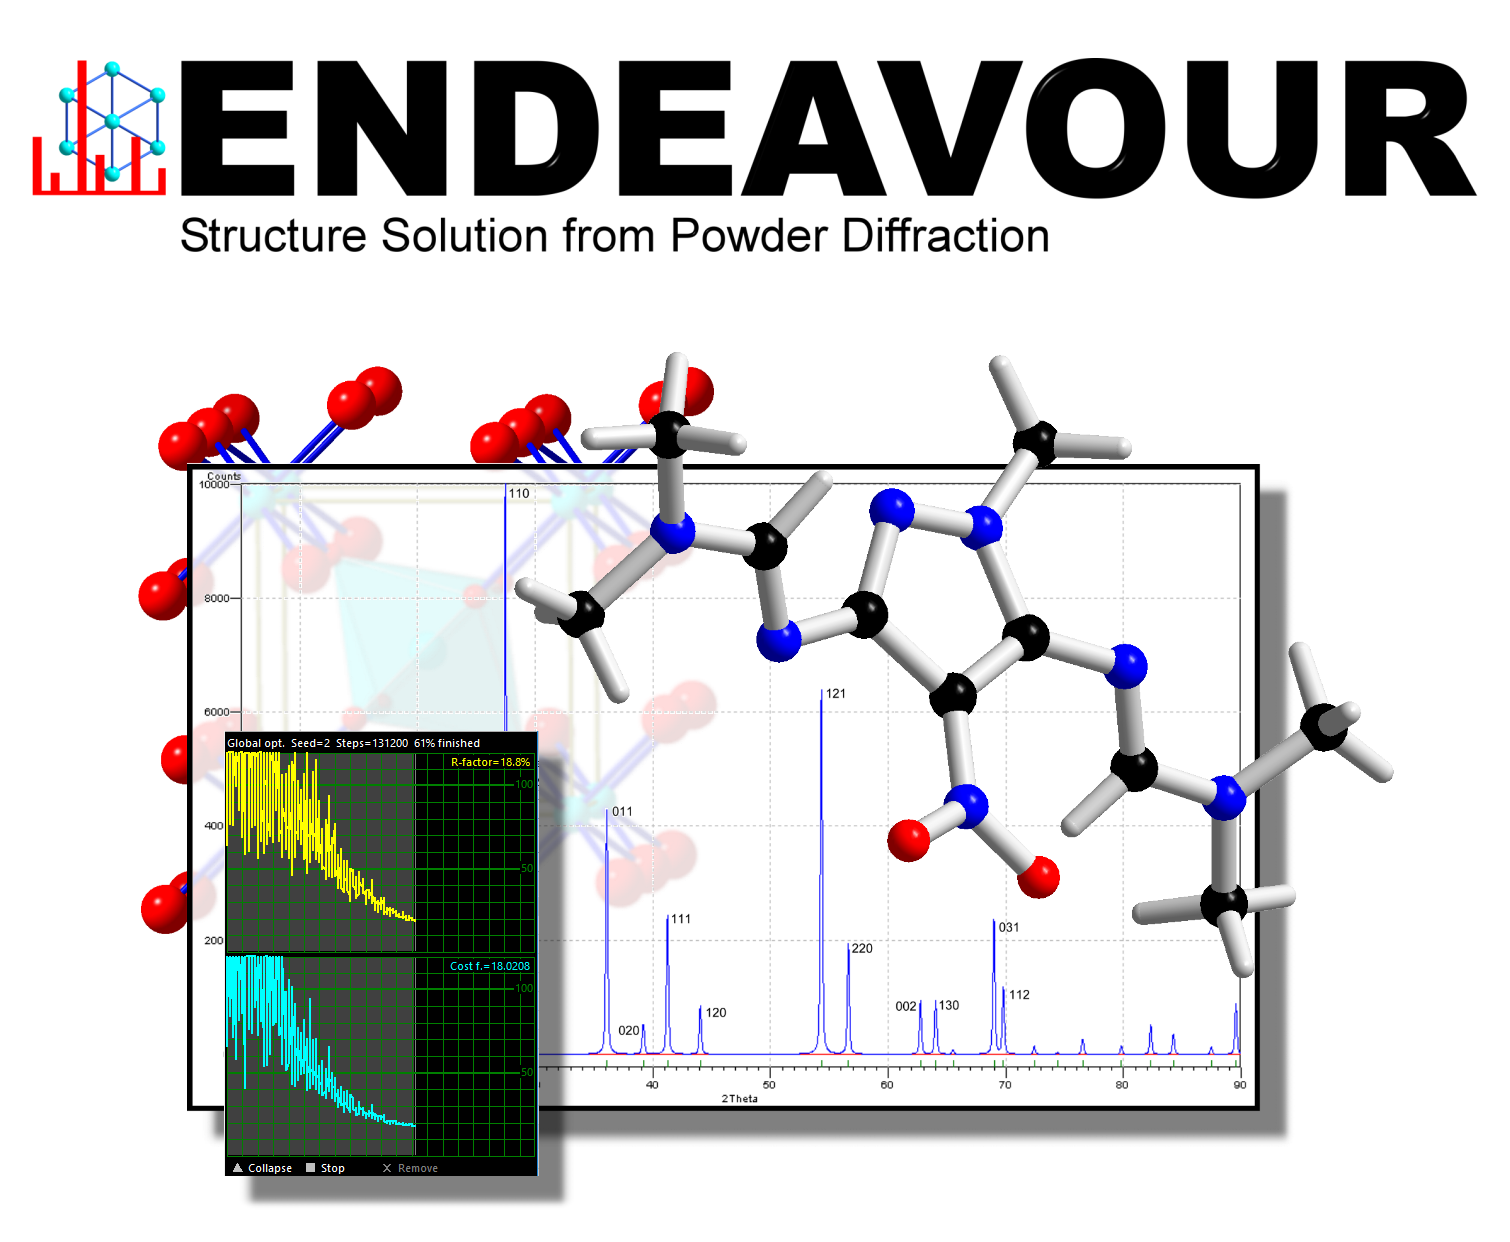 Match! - Phase Identification from Powder Diffraction